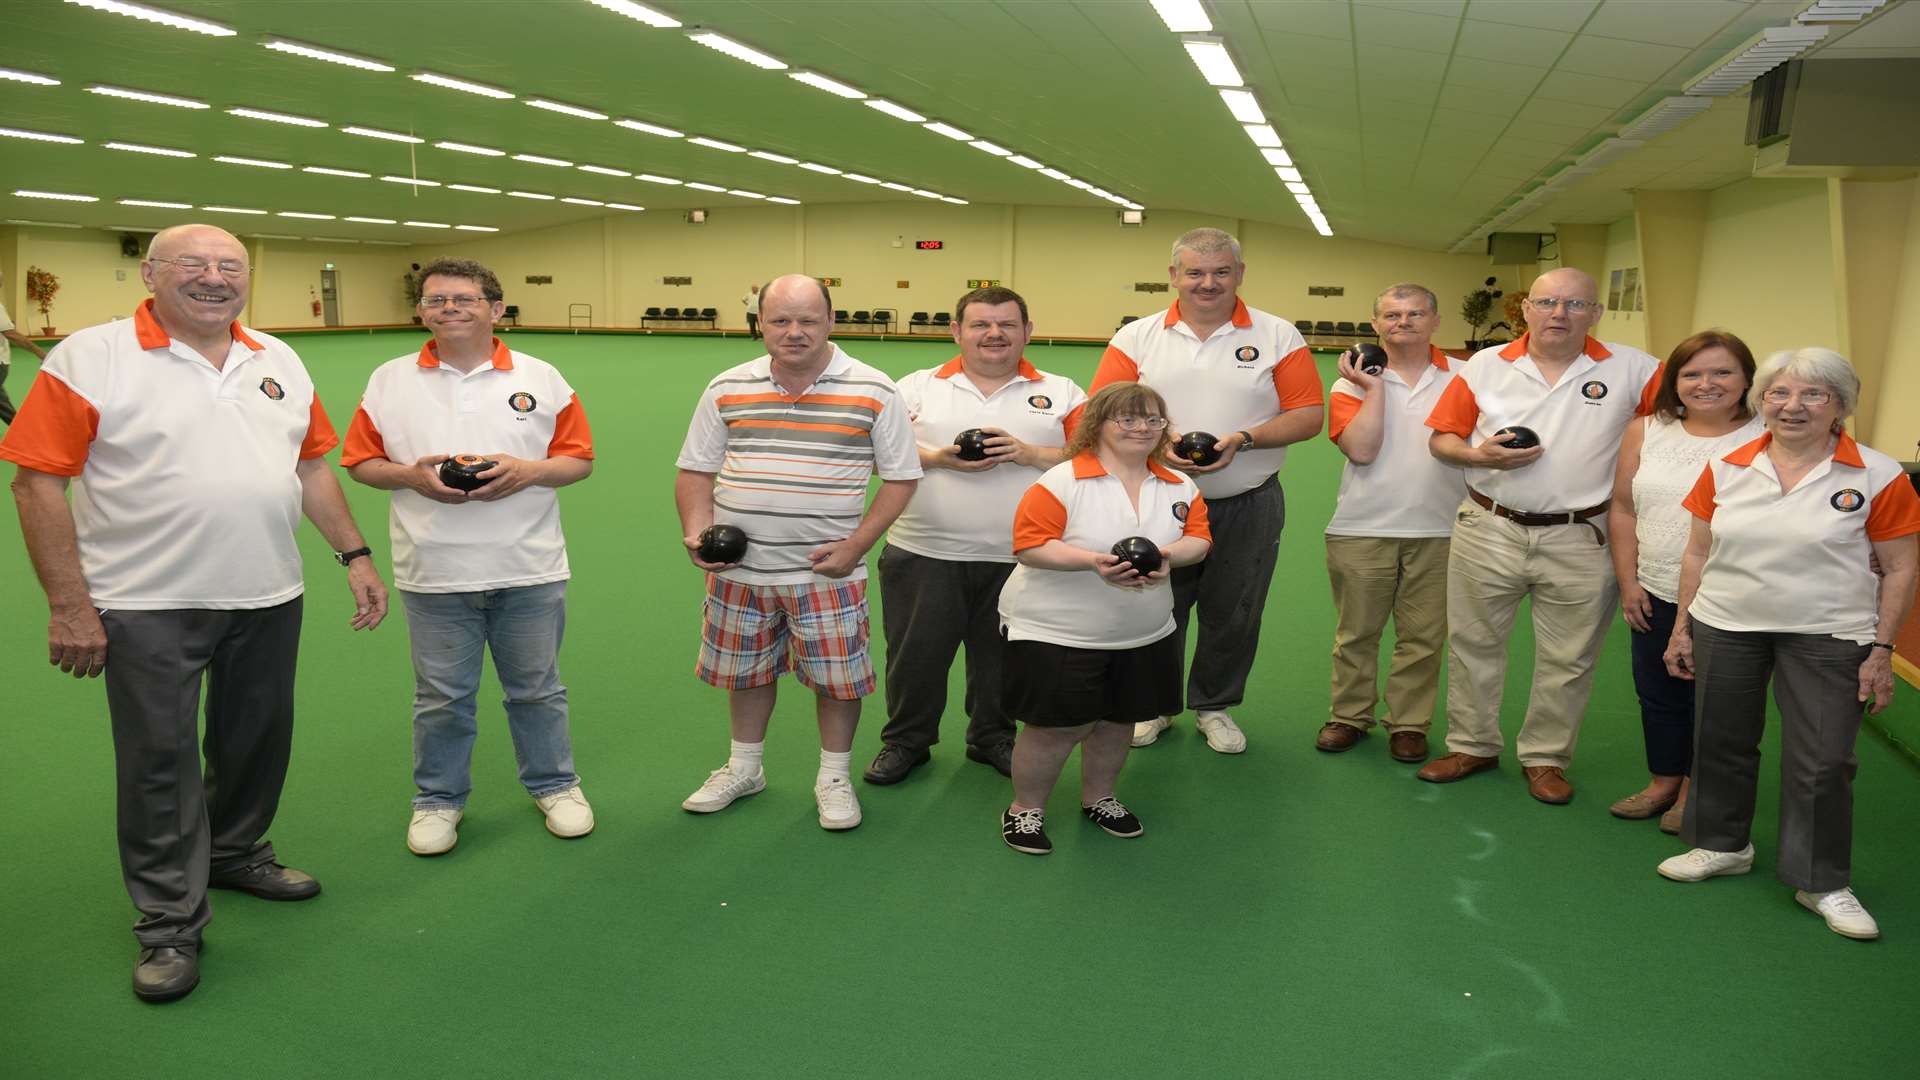 Coaches Robin Ingram, left, and Joyce Bacon, right, with participants at the Swale Indoor Bowls Centre